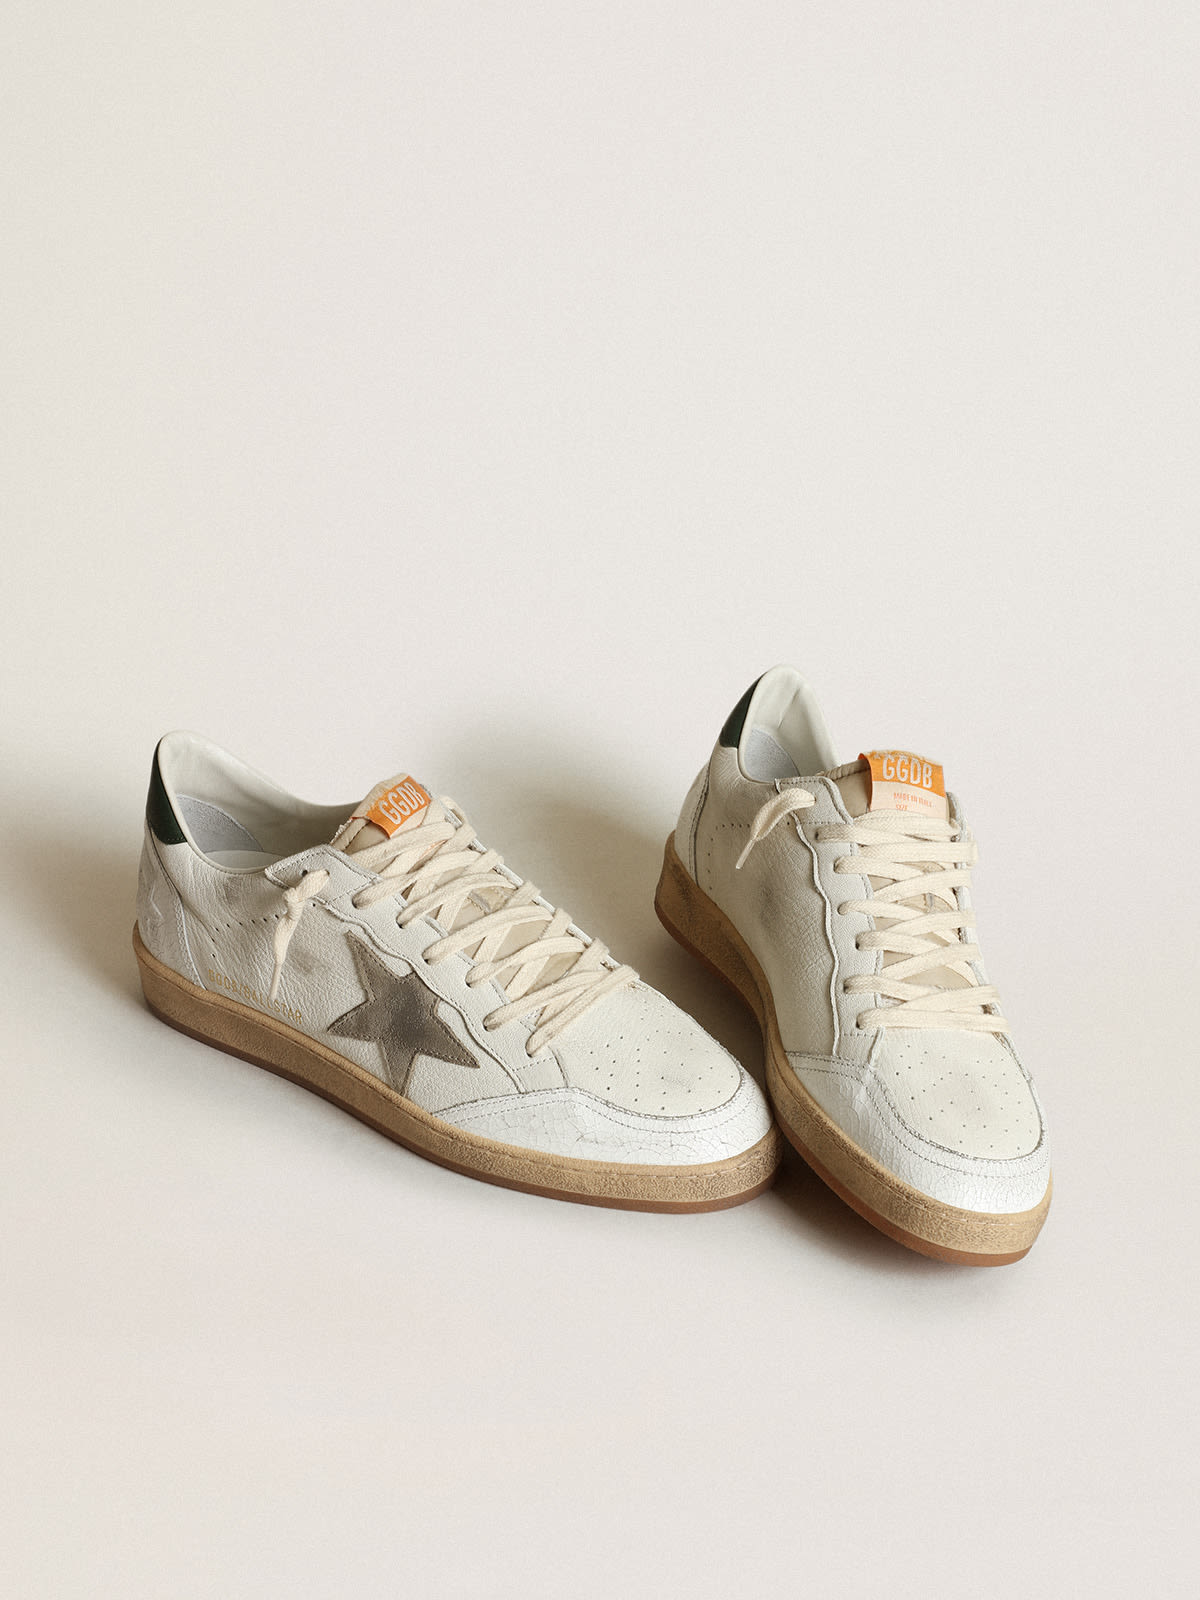 Golden Goose - Men's Ball Star in white nappa with dove gray suede star in 